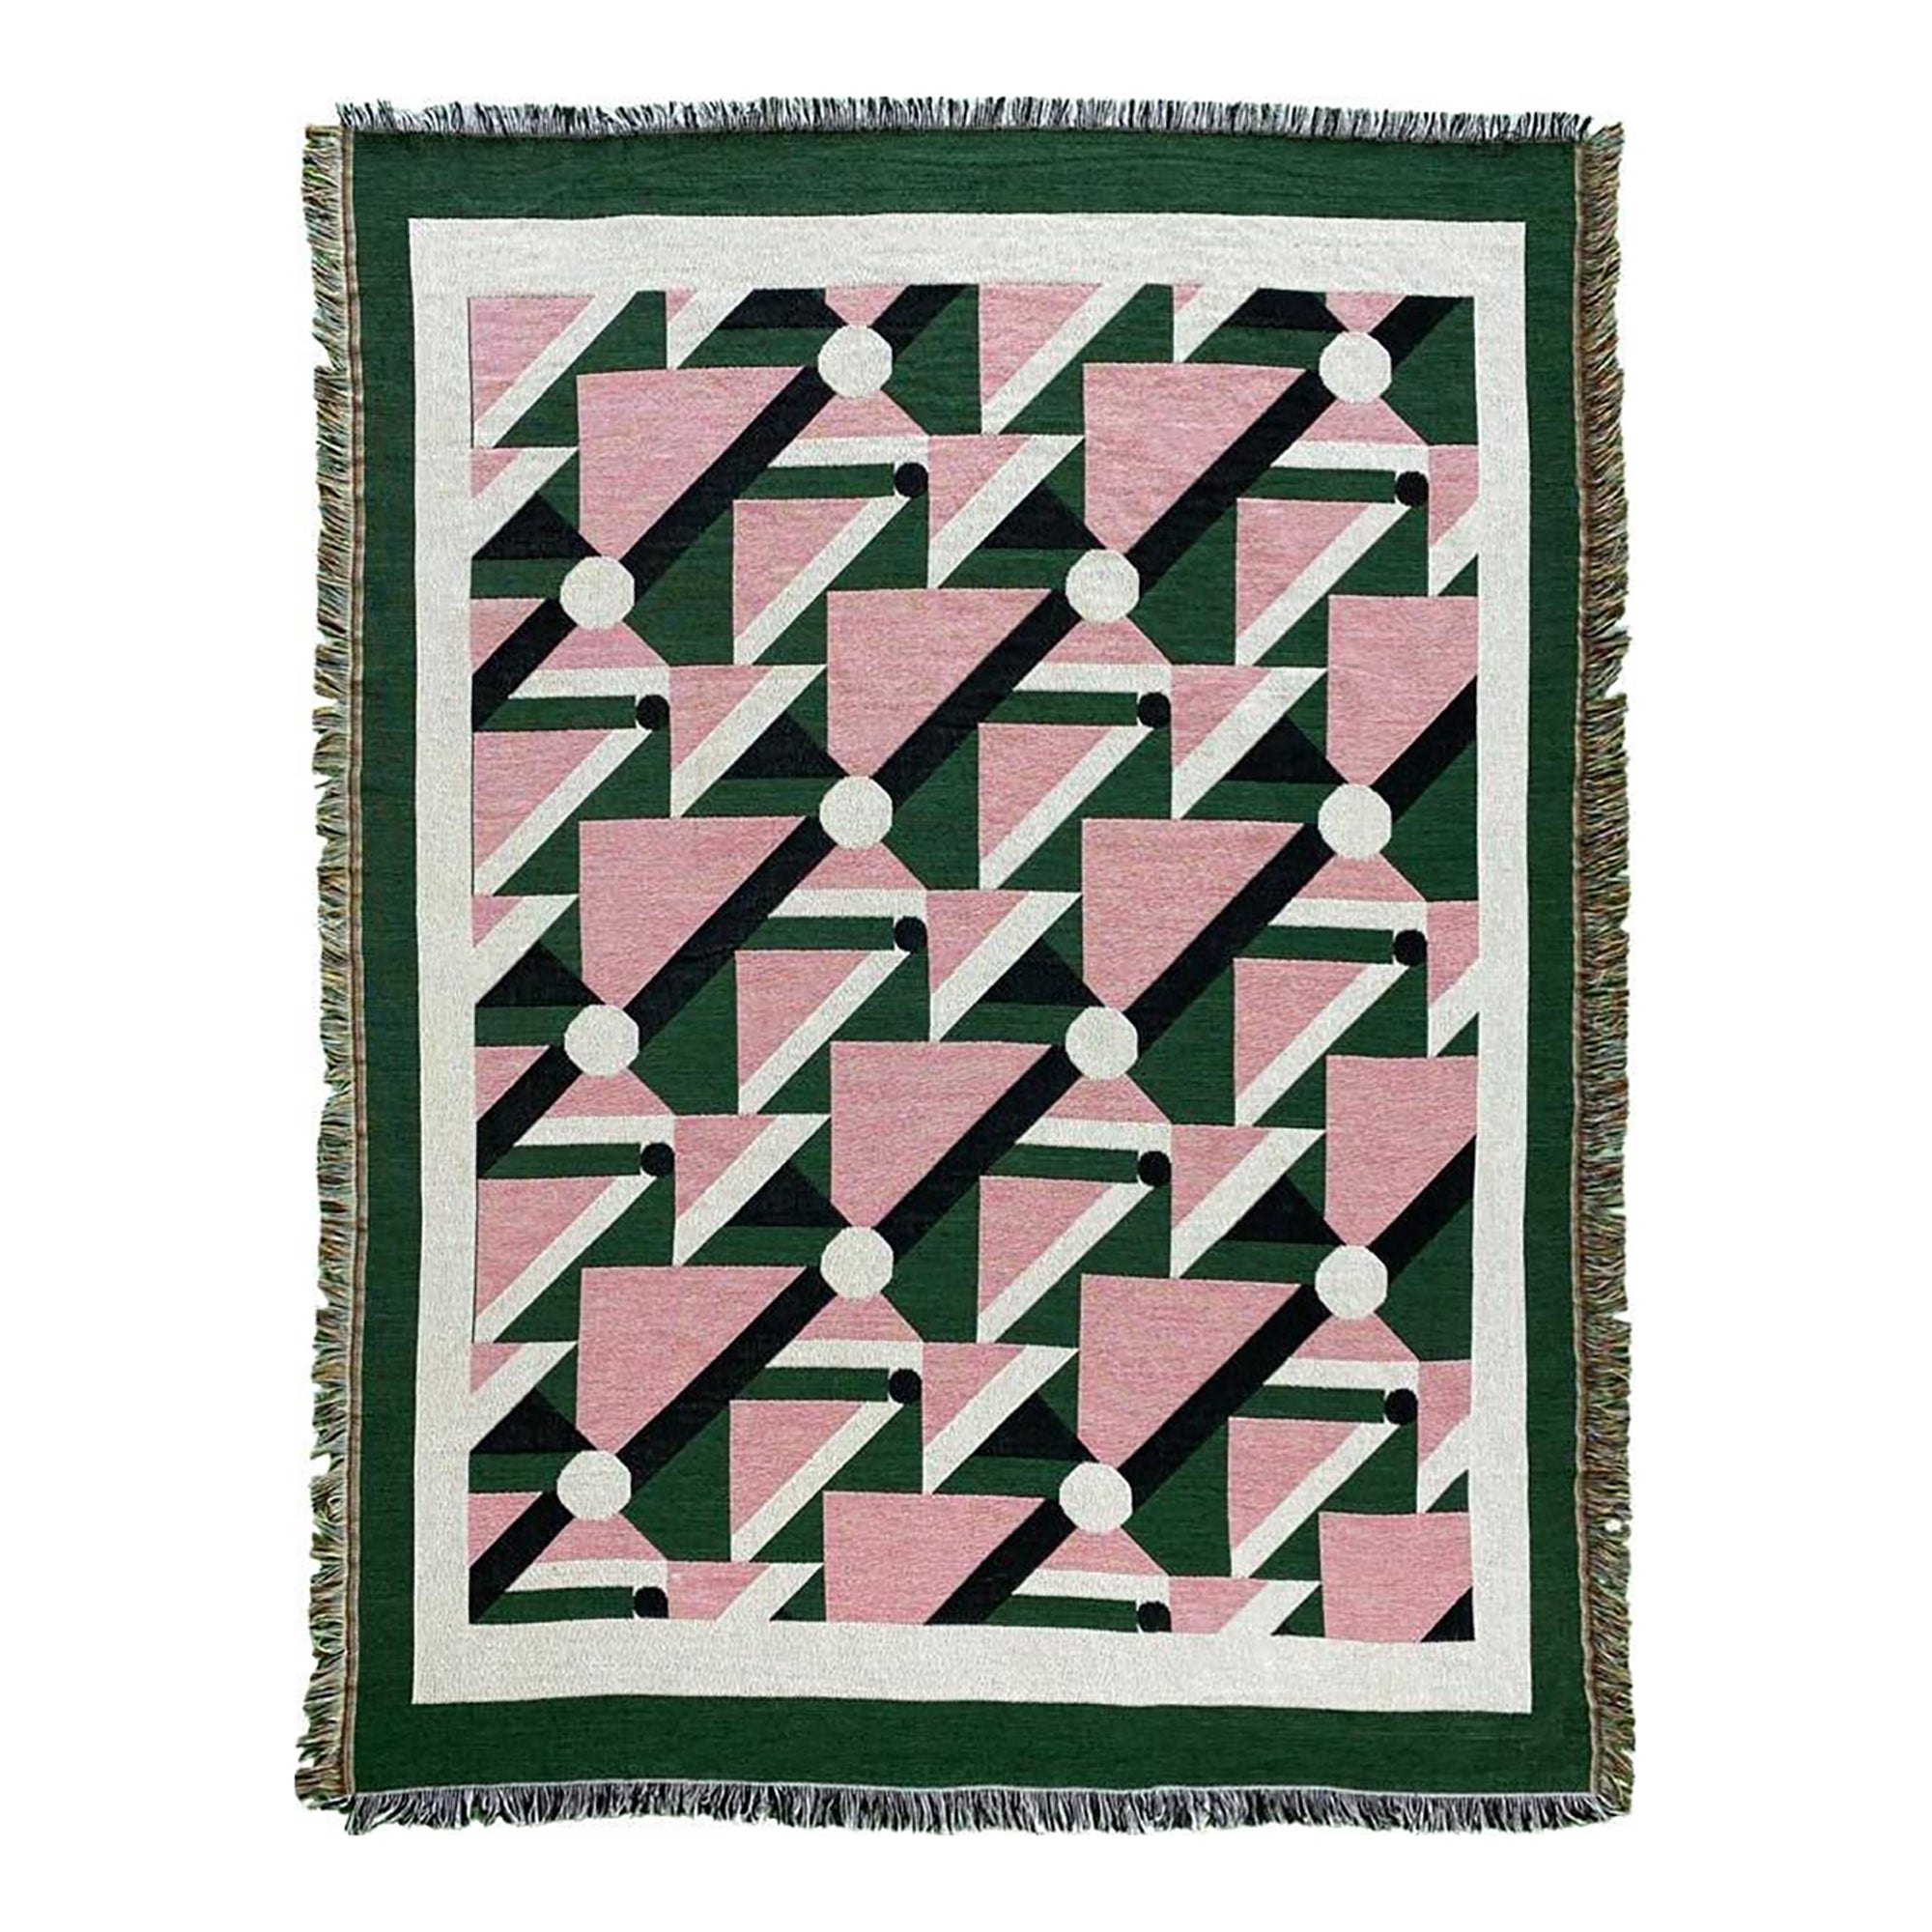 Diana Cotton Wall Hanging